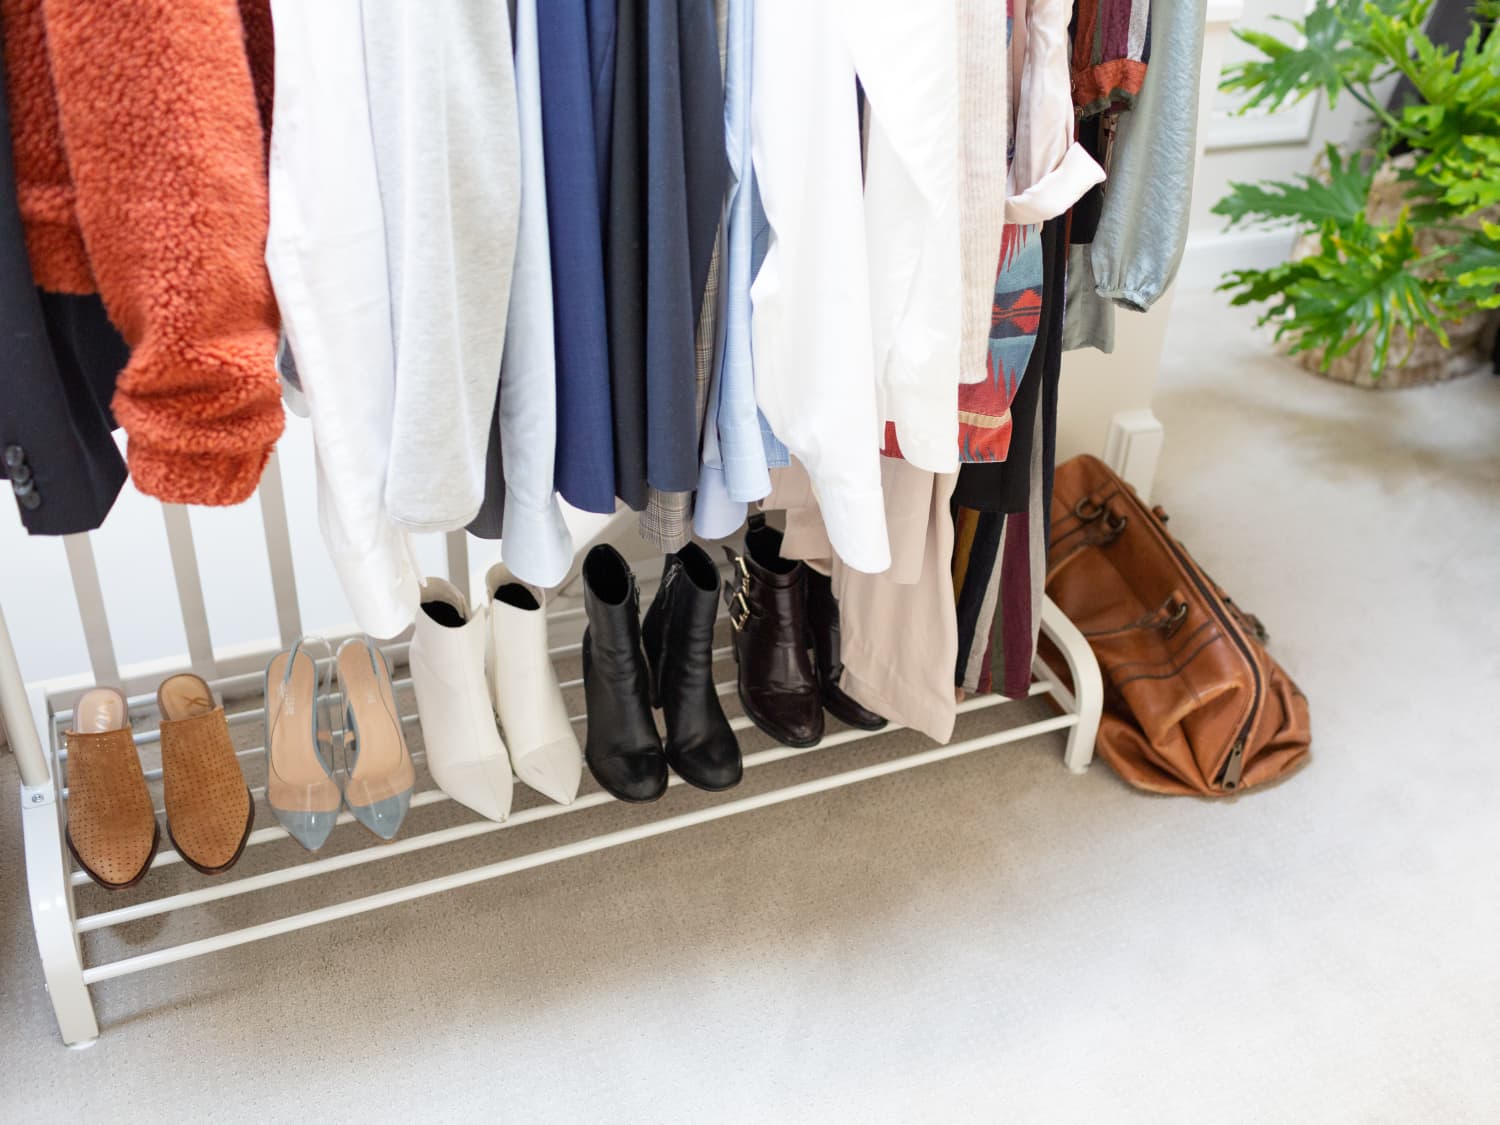 6 Important Things to Look for When Shopping for Secondhand Clothes